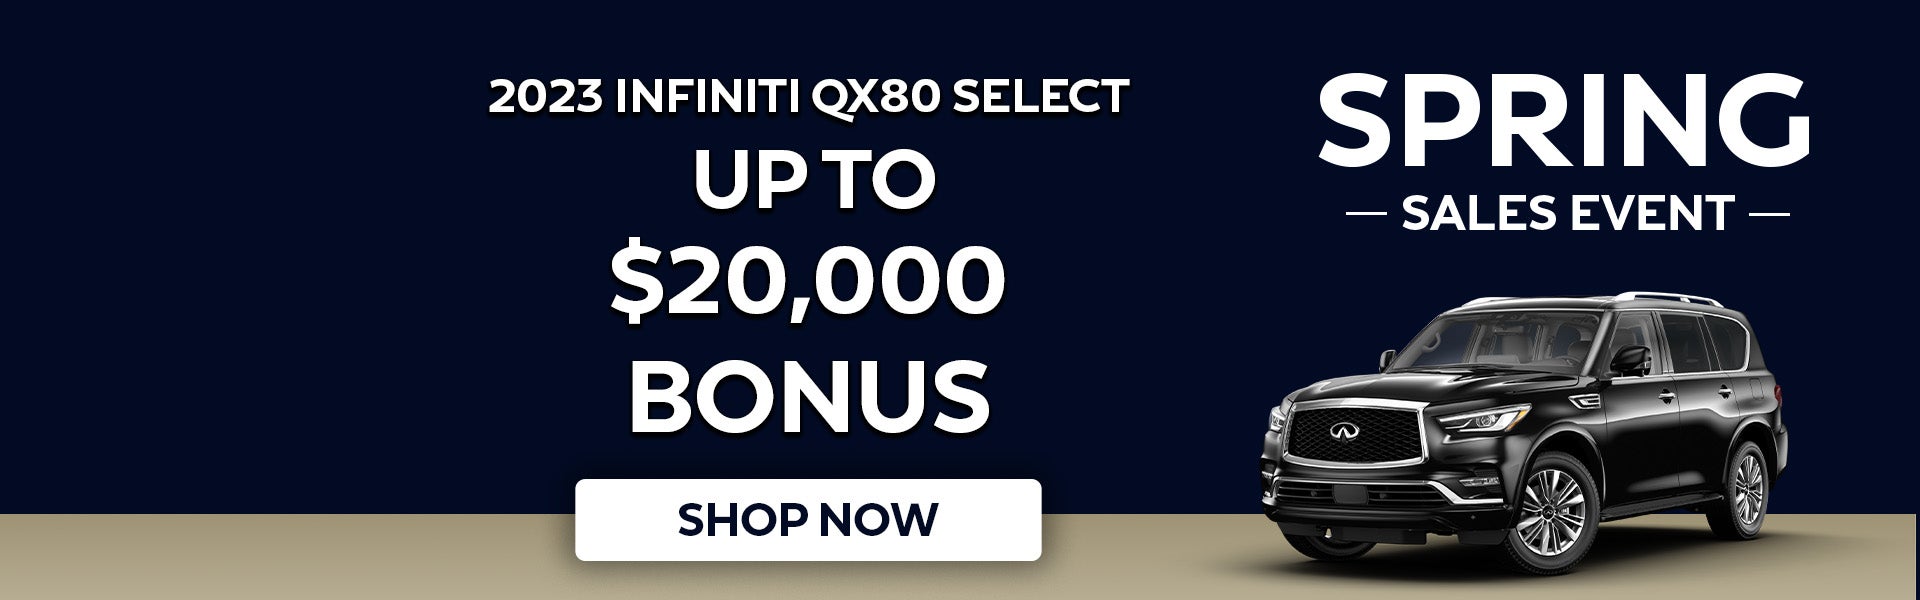 2023 INFINITI QX80 Select Special Offer